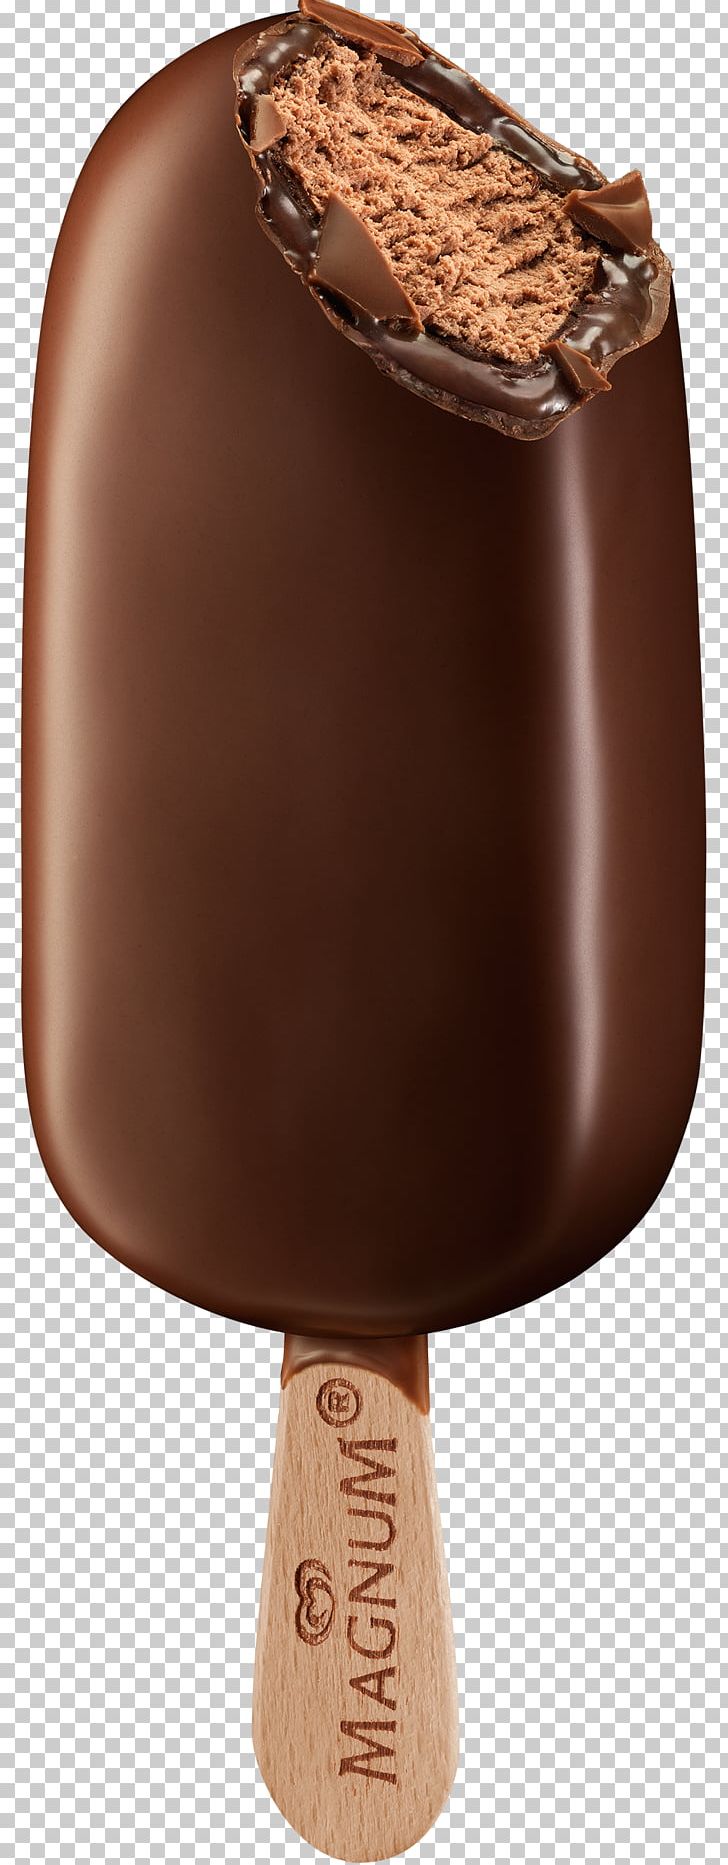 Chocolate Ice Cream Magnum Ice Cream Bar PNG, Clipart, Almond, Ben Jerrys, Caramel, Chocolate, Chocolate Ice Cream Free PNG Download